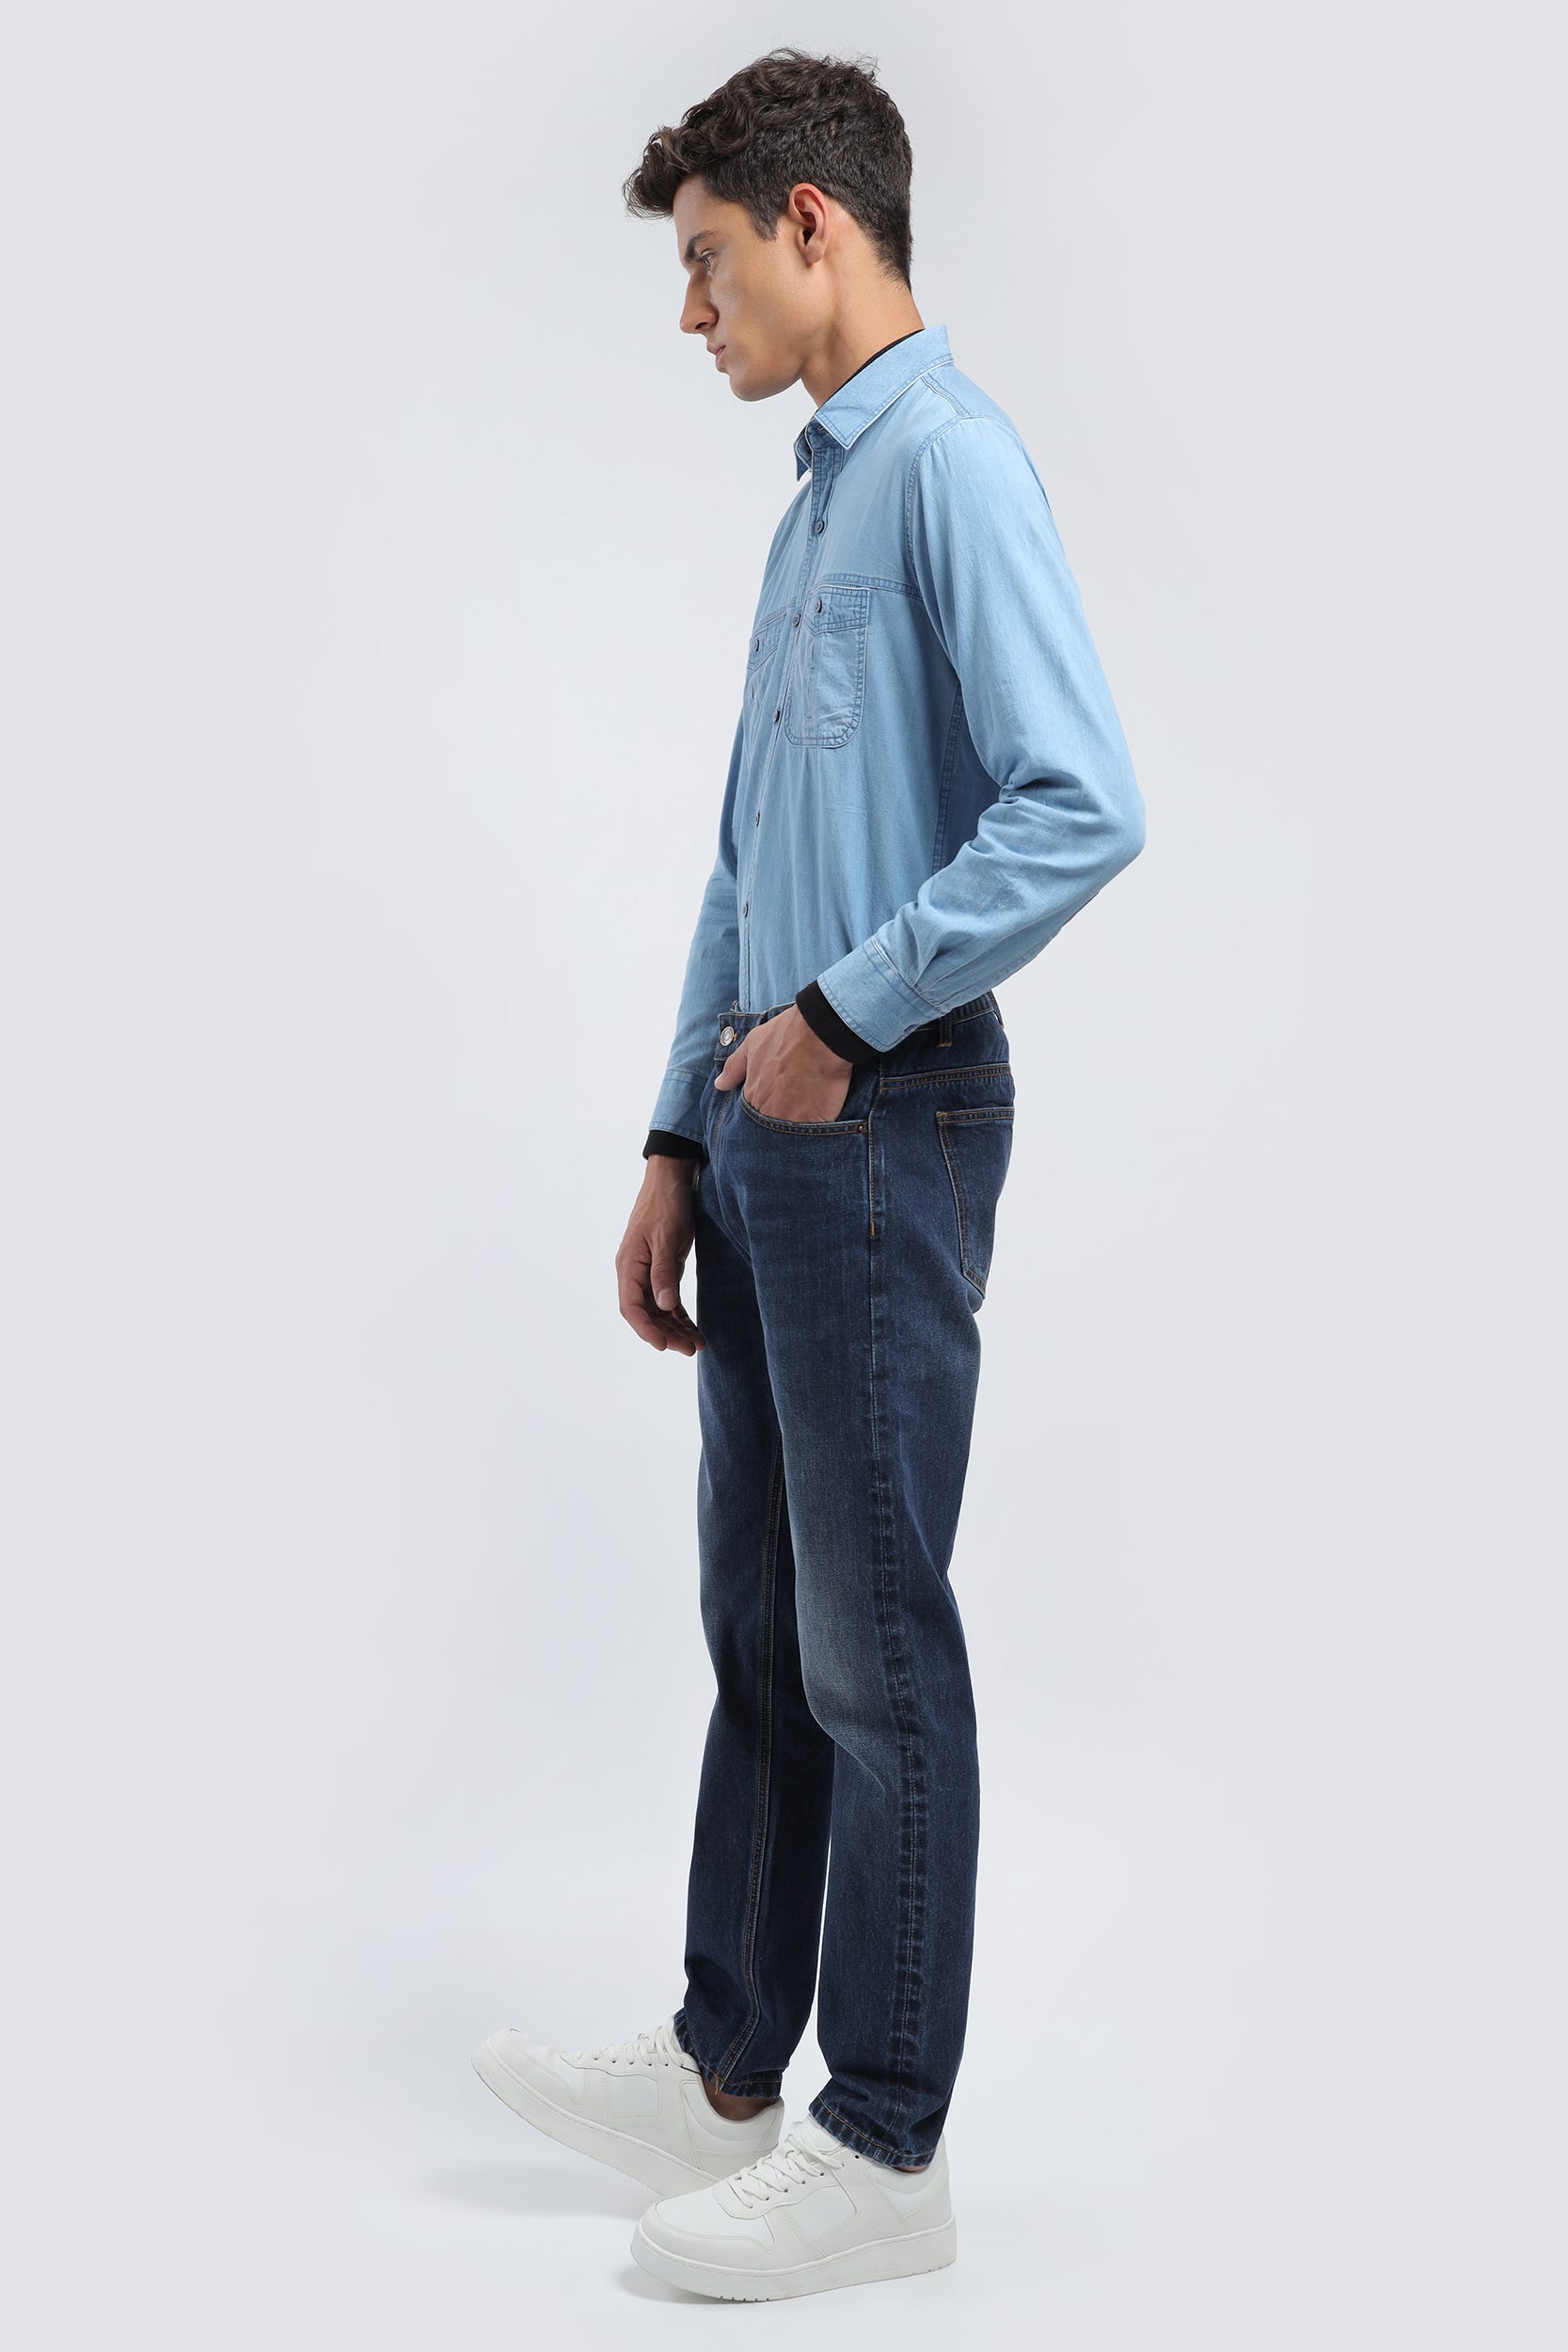 Stylish 2020 Summer Denim Cowboy Denim Shirts For Men For Men Slim Fit  Cotton Jeans With Short Sleeves, Asian Size 3XL From Lz8882, $20.31 |  DHgate.Com